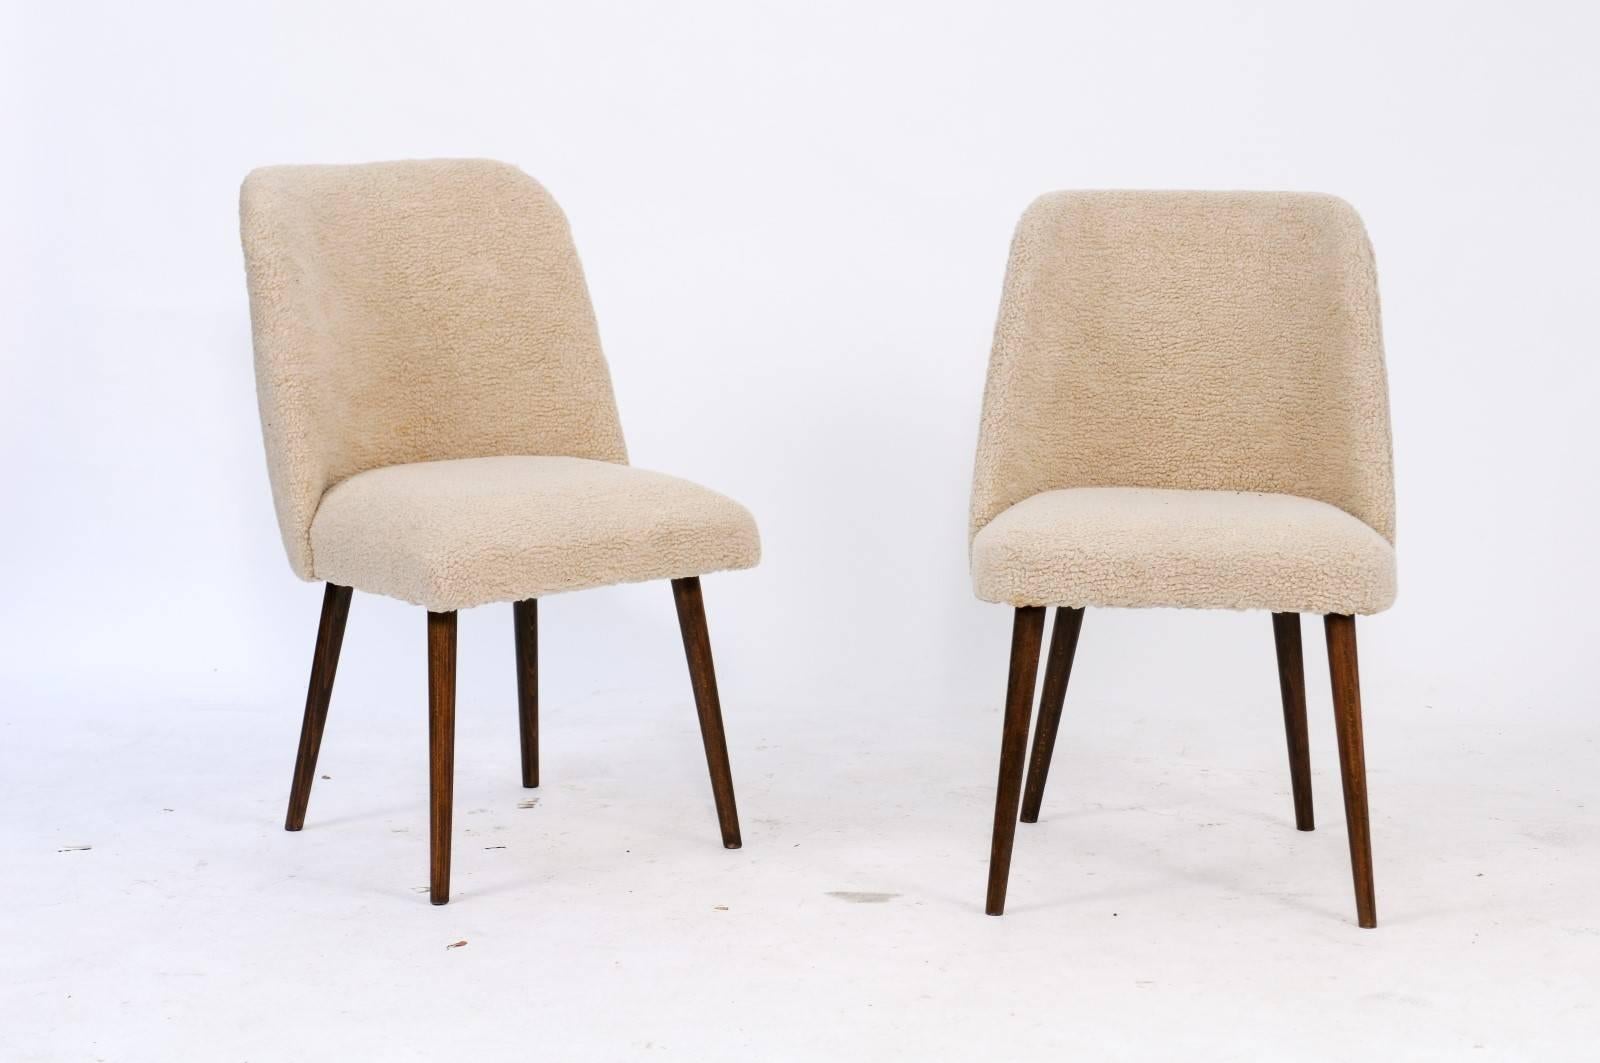 A pair of French 1950s mouton upholstered chairs. What do you get when you mix some 1950s attitude with a little 2017 je-ne-sais-quoi? For us, it’s sassy, fun chairs with retro frames and eye-catching mouton upholstery! As comfortable as they are